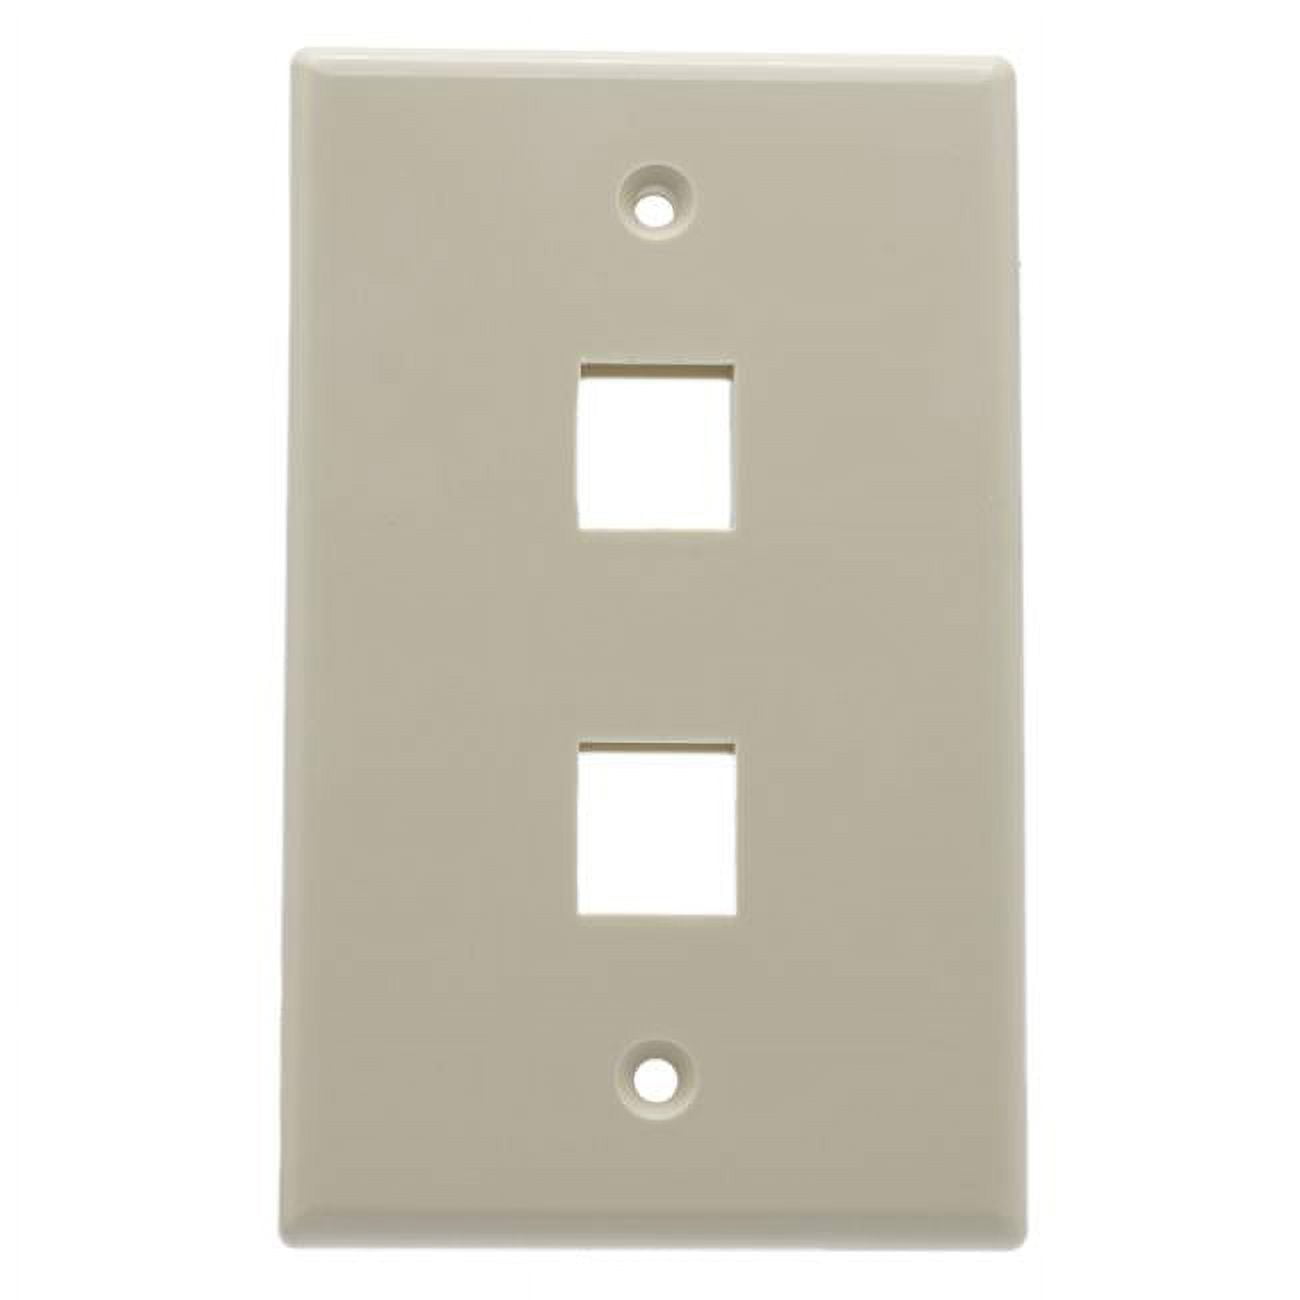 Picture of CableWholesale 3012-09302 Keystone Single Gang 2 Port Wall Plate, Lite Almond